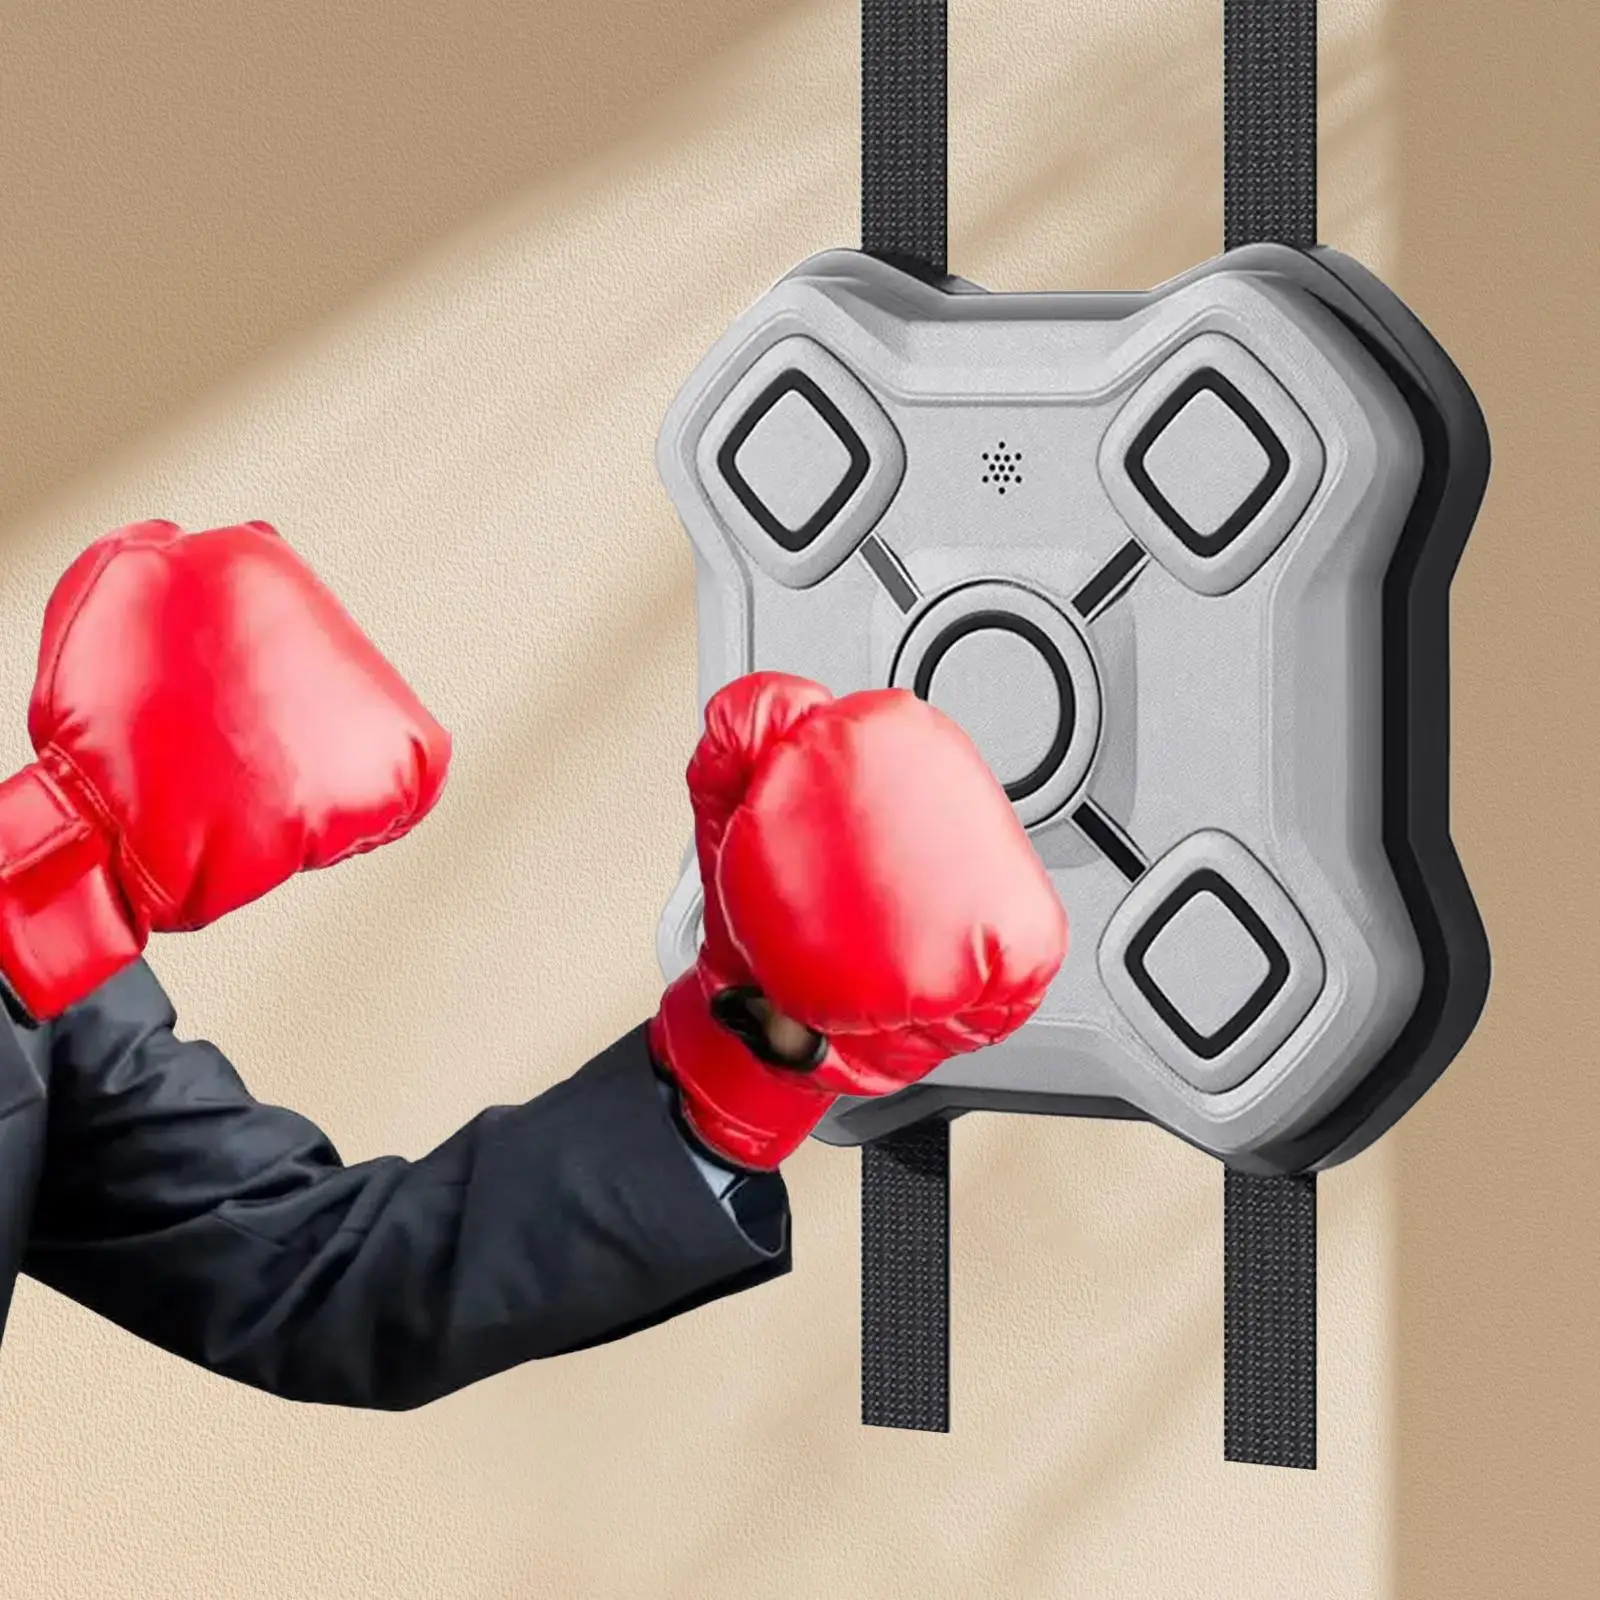 Music Boxing Machine Home Rechargeable Trainer Music Boxing Pads Relaxing Indoor Sports Target Boxing Trainer with Lights Smart